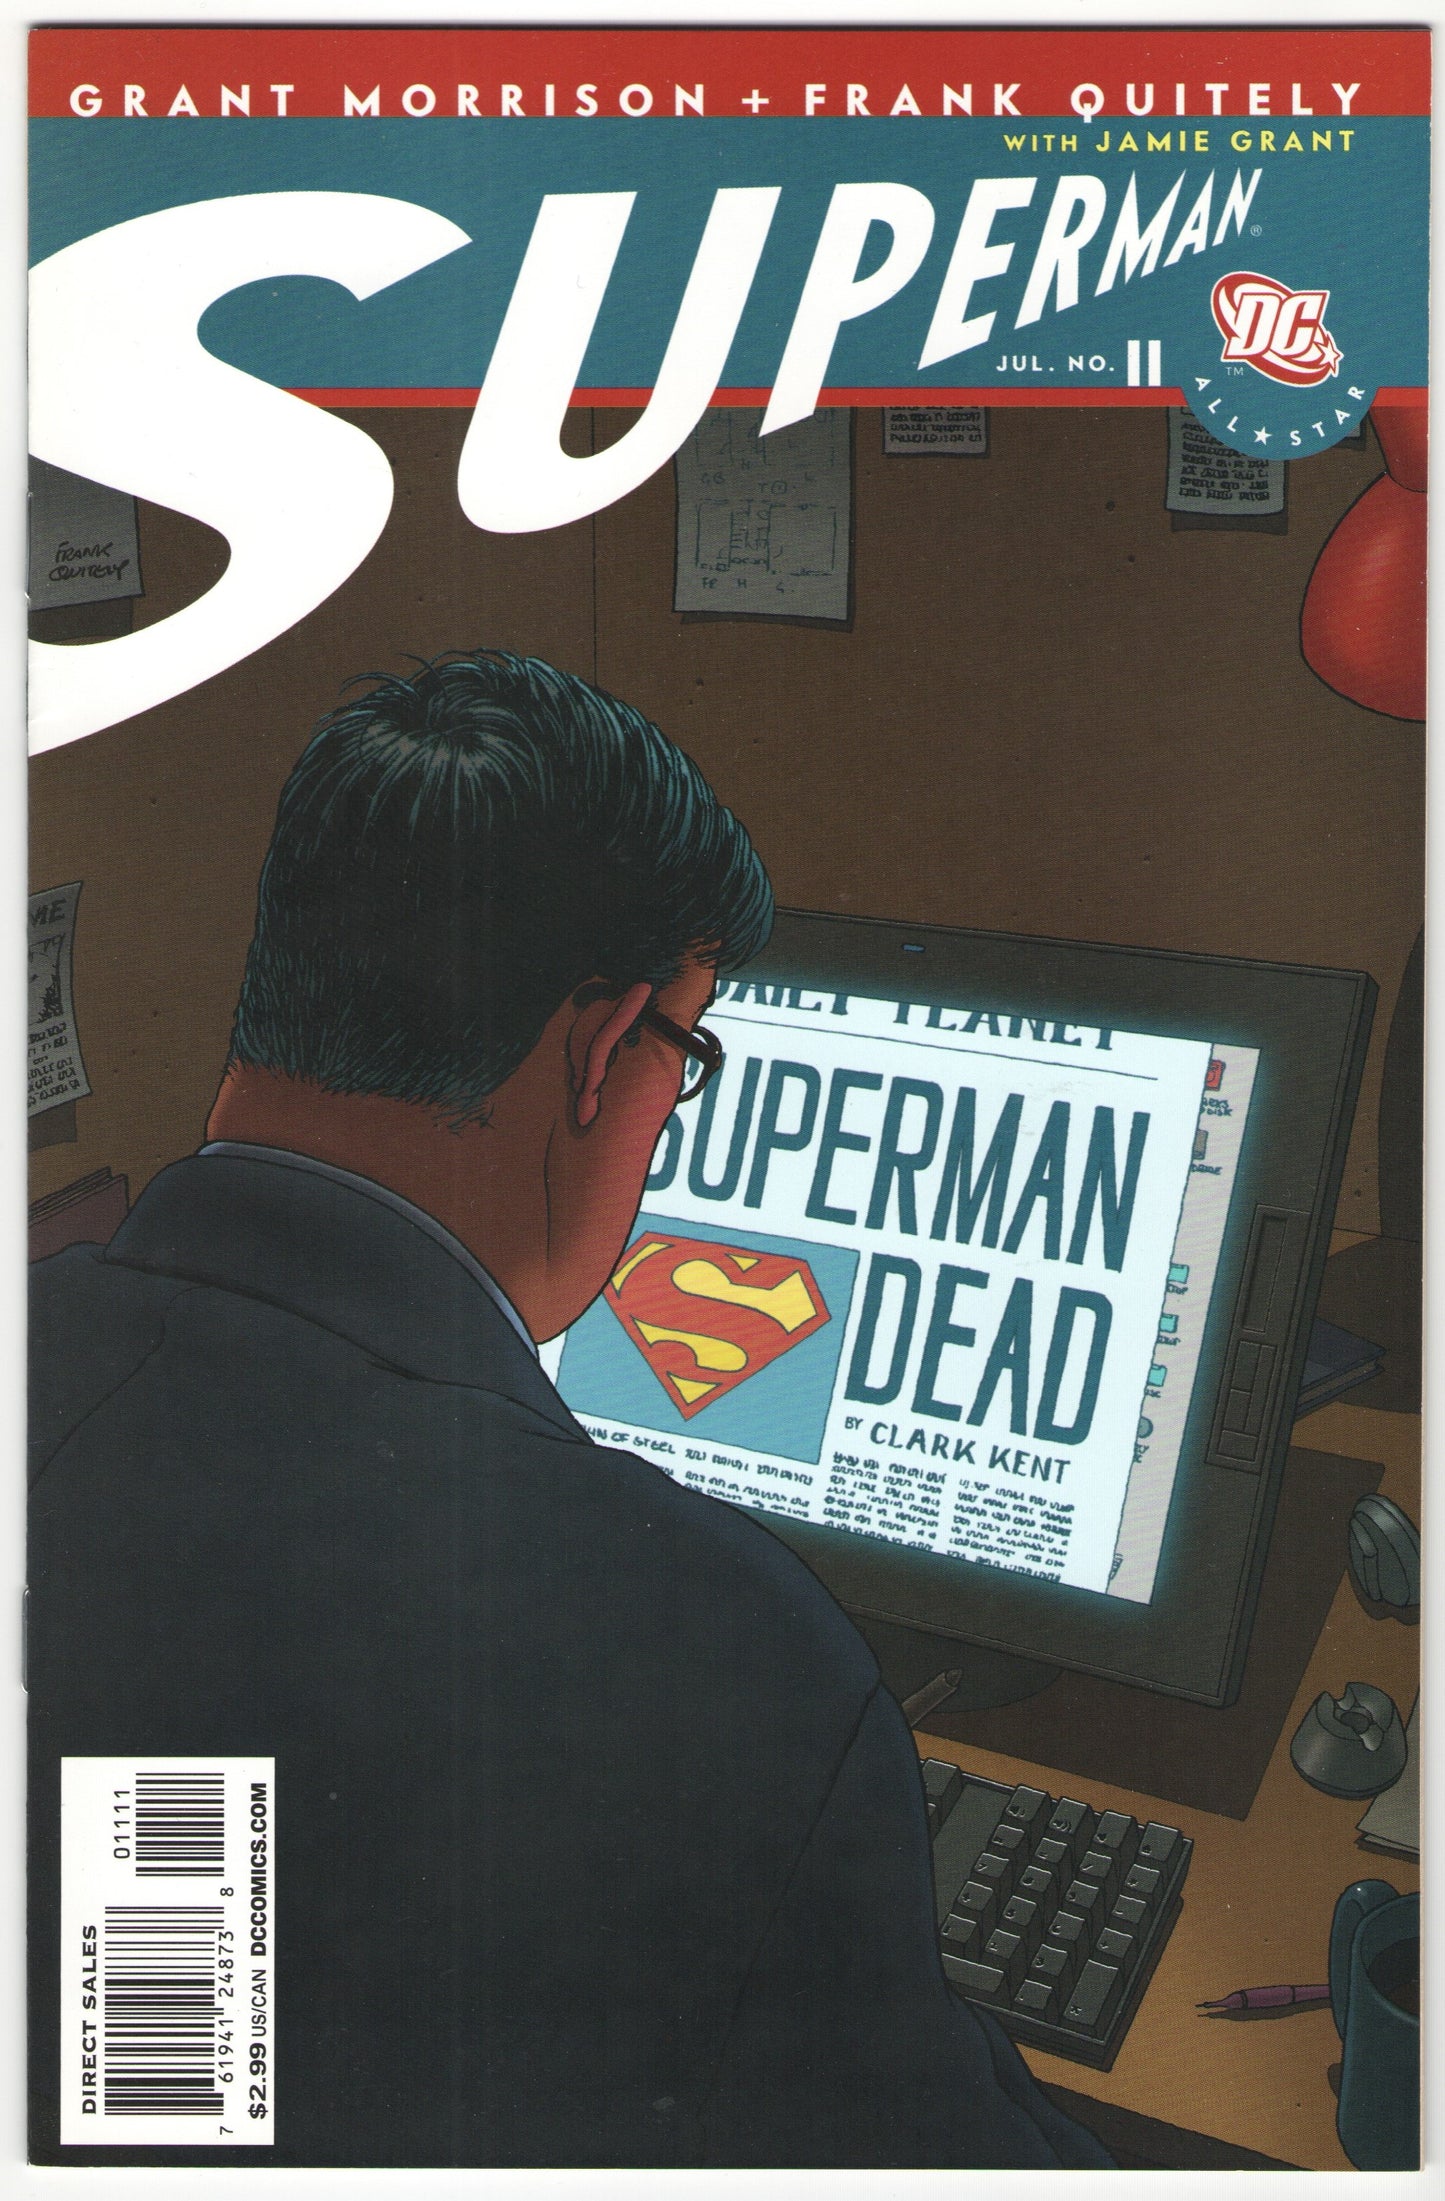 All Star Superman (2005) Completed Limited Series